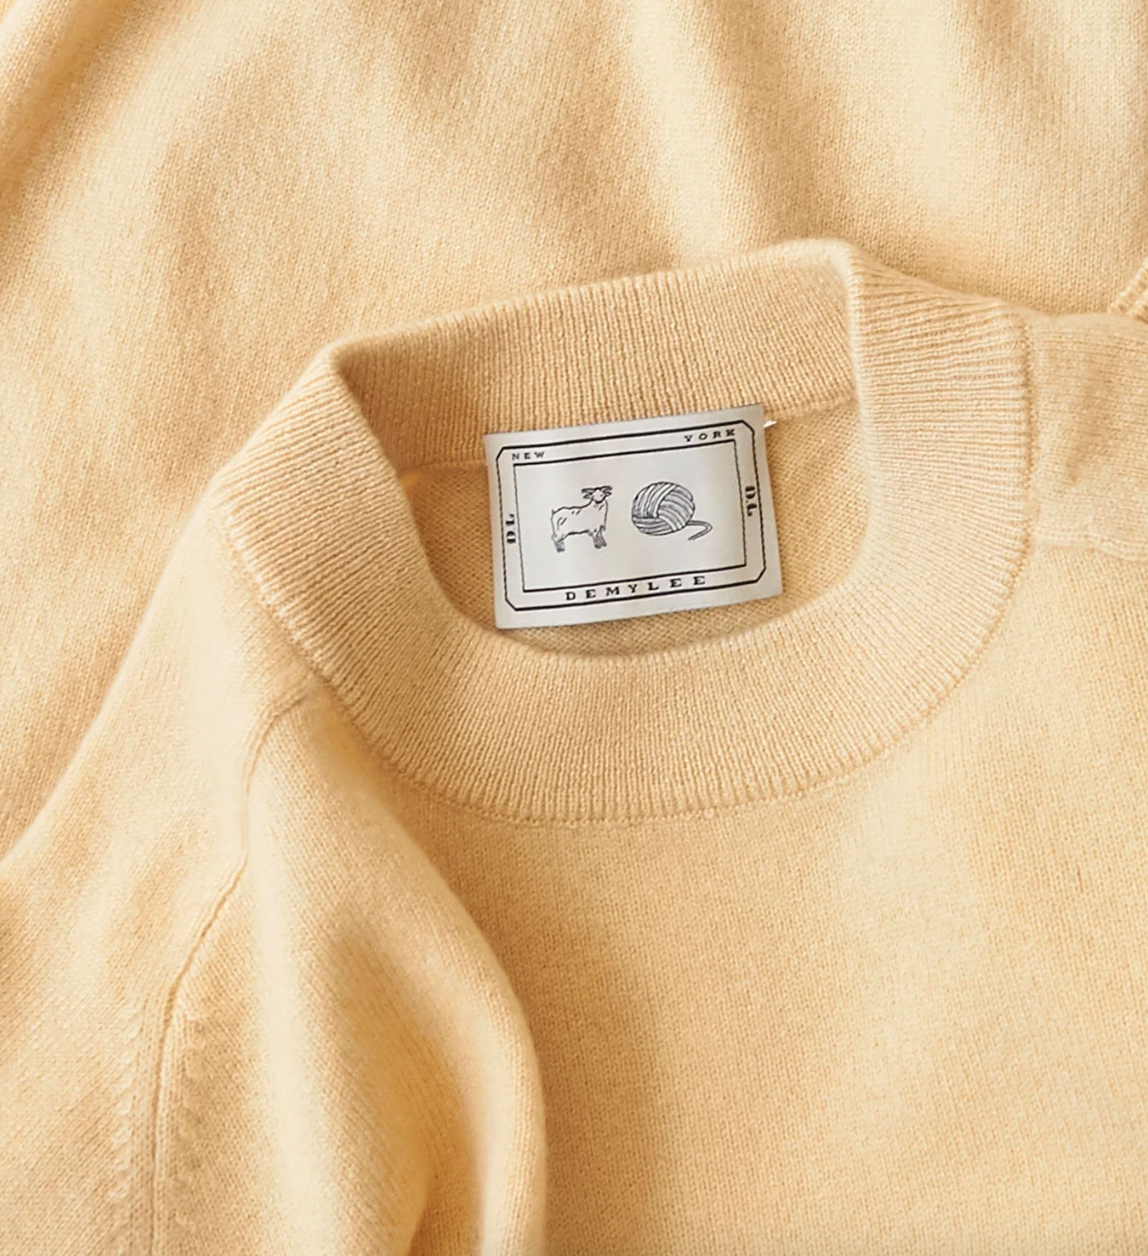 Product Image for Irelia Cashmere Top, Soft Yellow